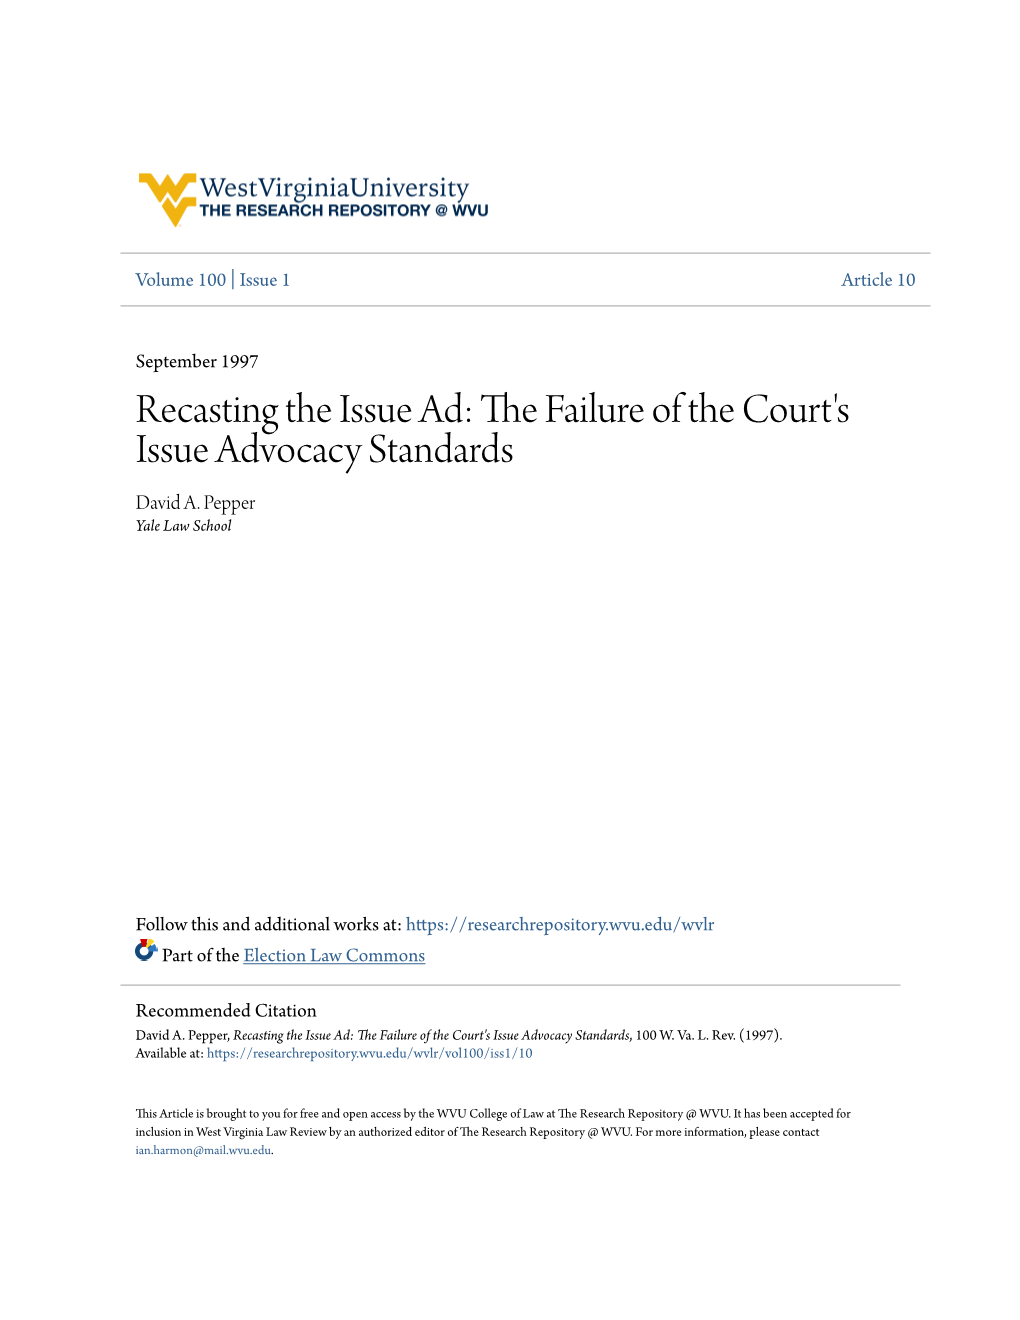 Recasting the Issue Ad: the Failure of the Court's Issue Advocacy Standards, 100 W